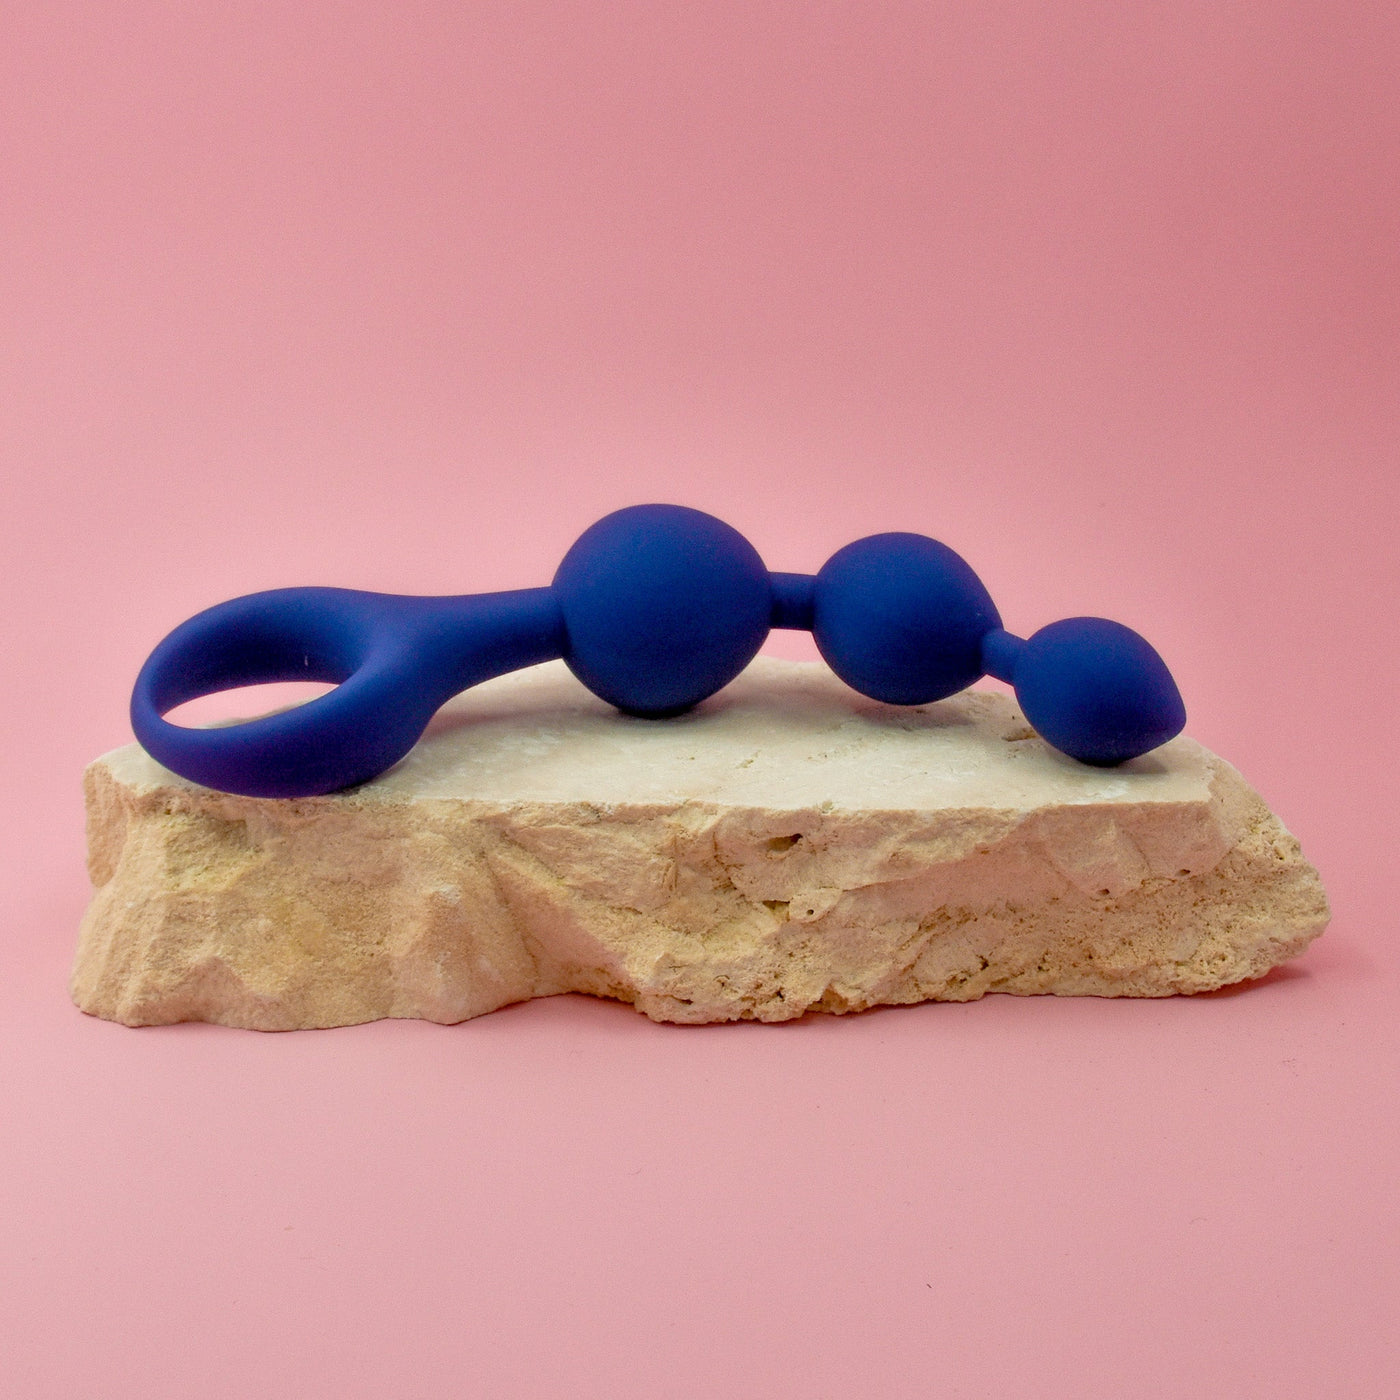 Ripple Anal Beads Silicone - Wands of Lust Co